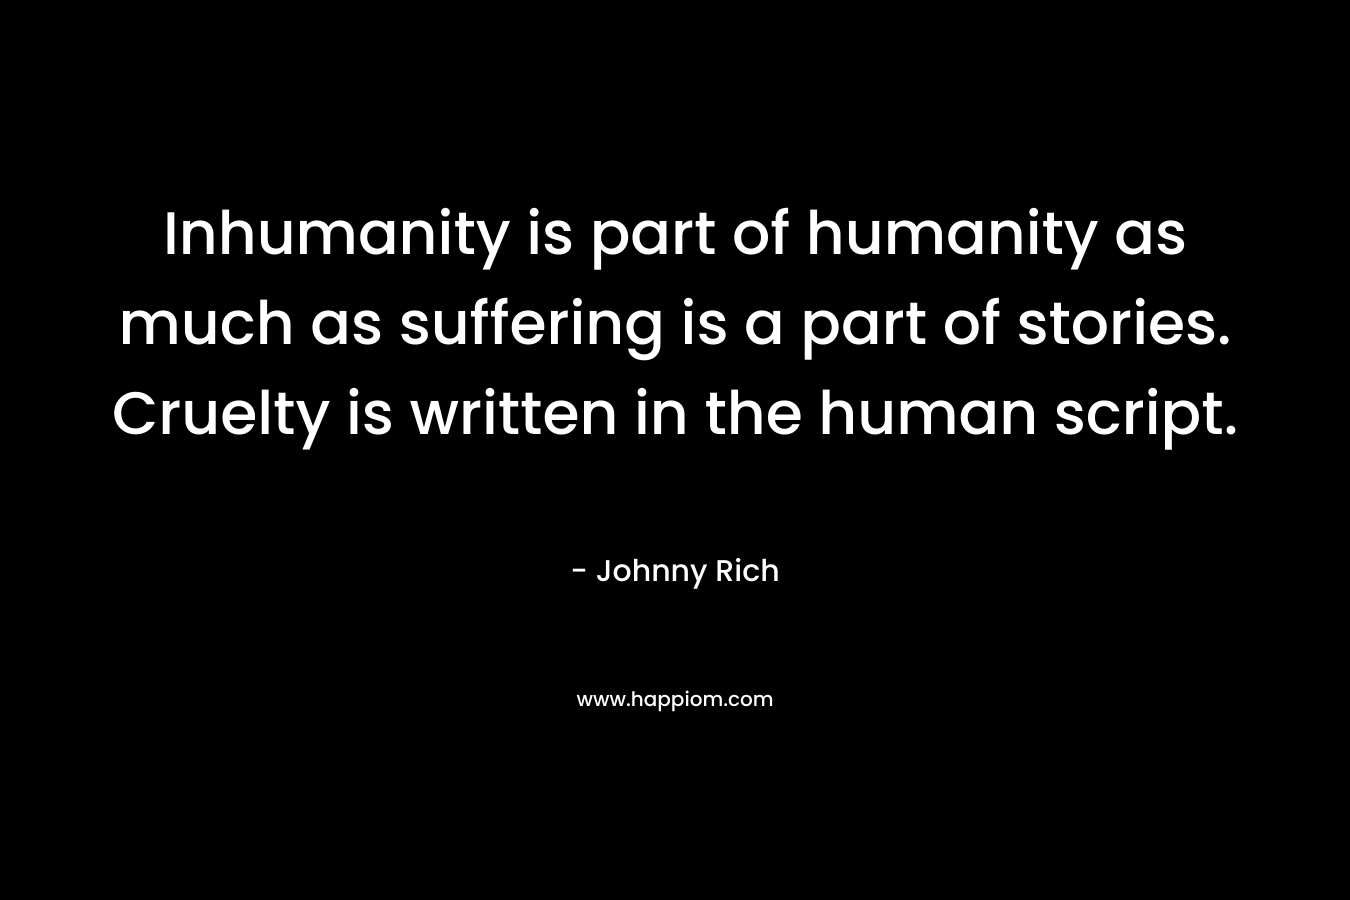 Inhumanity is part of humanity as much as suffering is a part of stories. Cruelty is written in the human script.